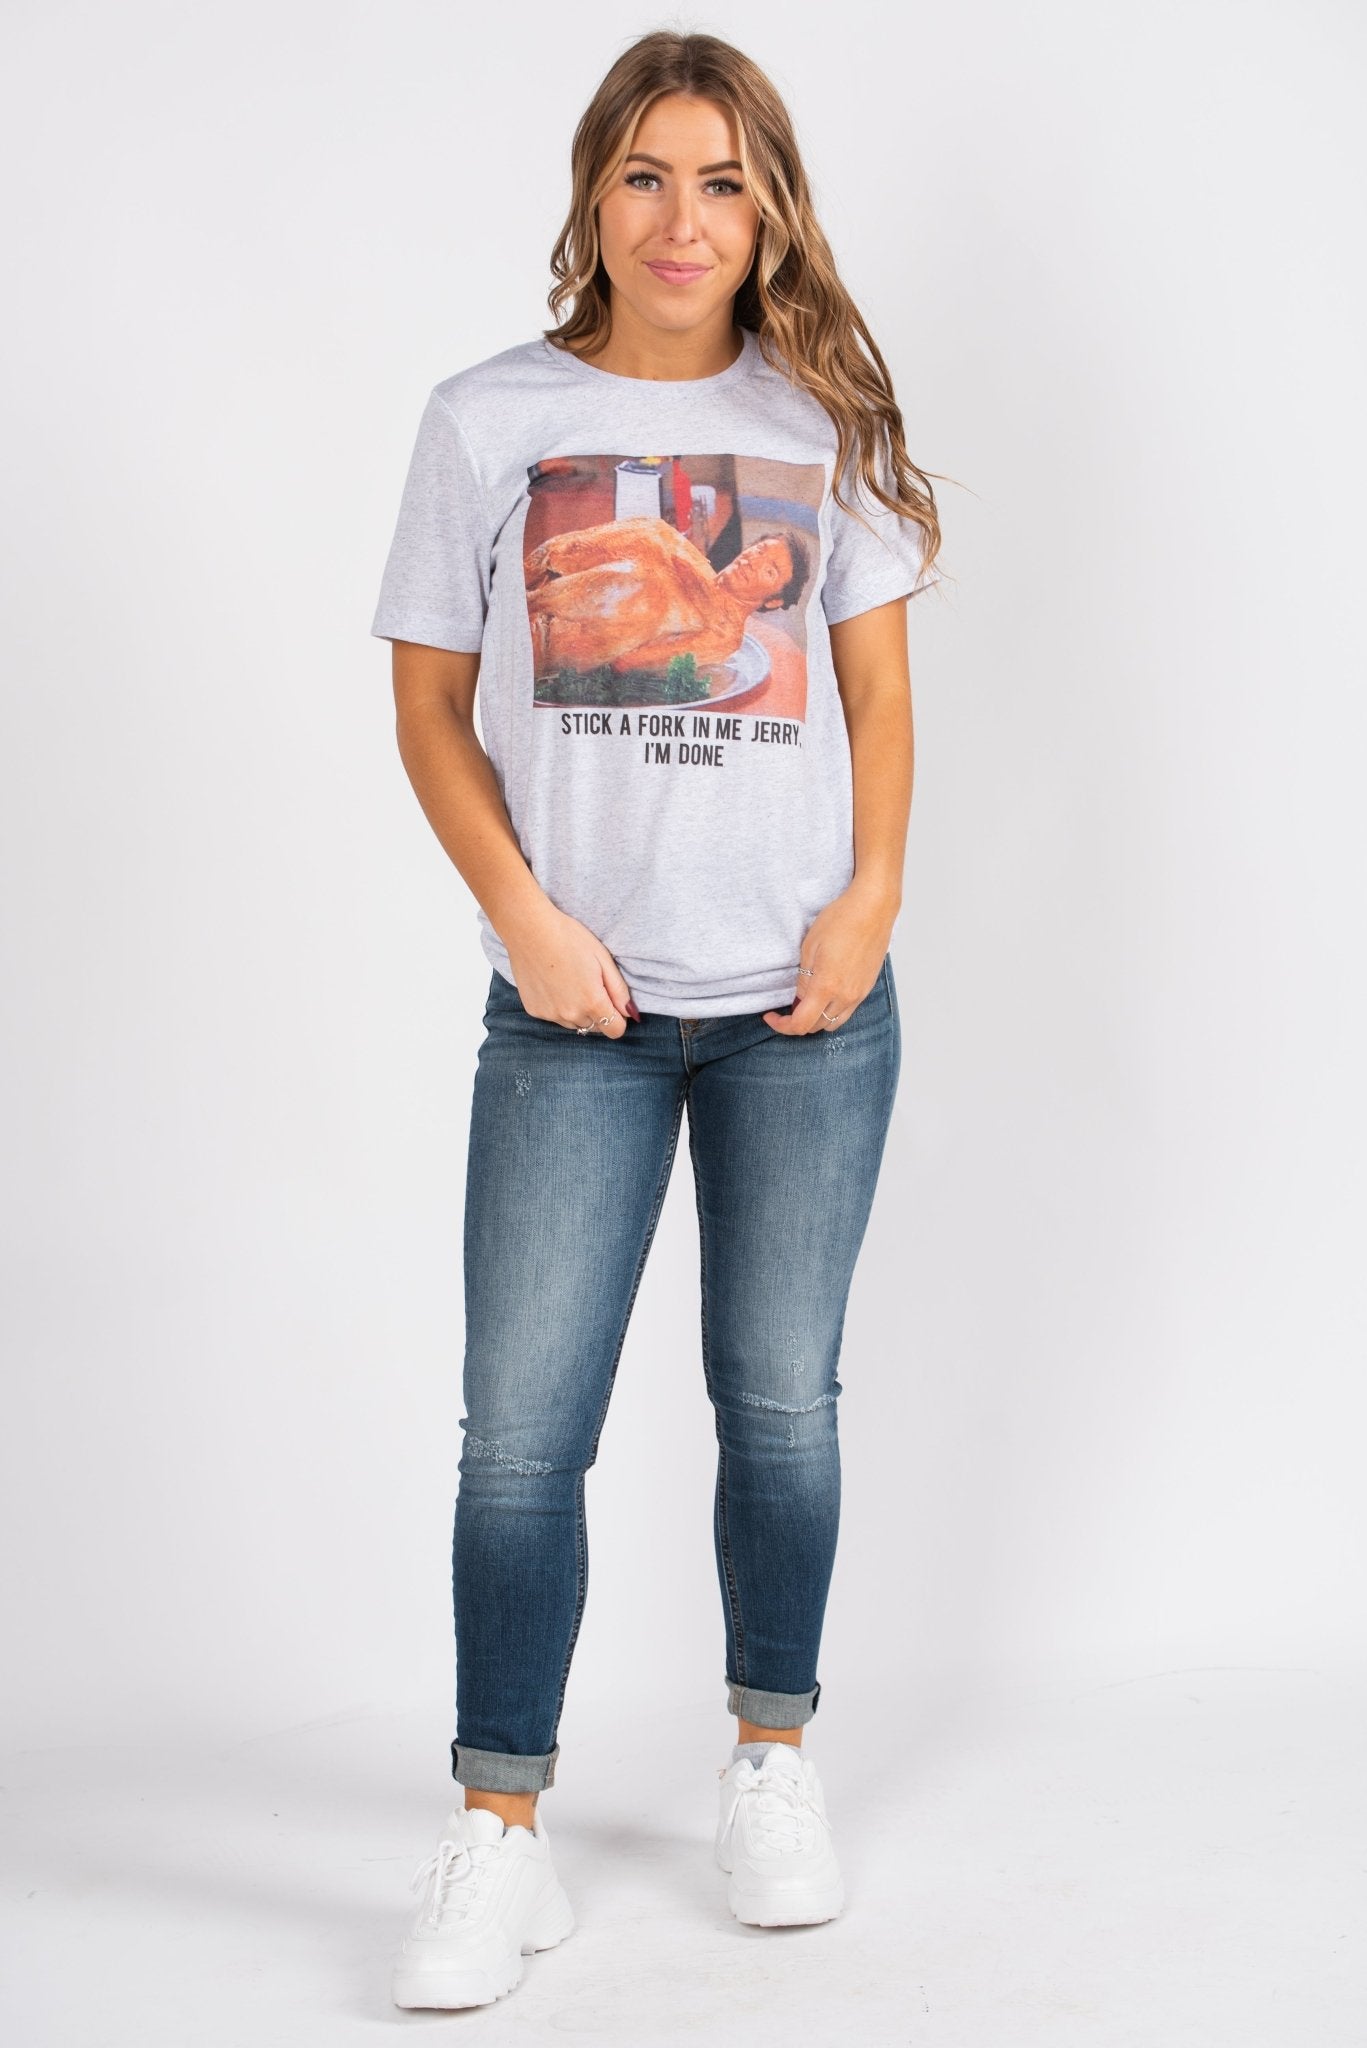 Seinfeld Stick a Fork In Me unisex short sleeve t-shirt - Trendy T-shirts - Cute Graphic Tee Fashion at Lush Fashion Lounge Boutique in Oklahoma